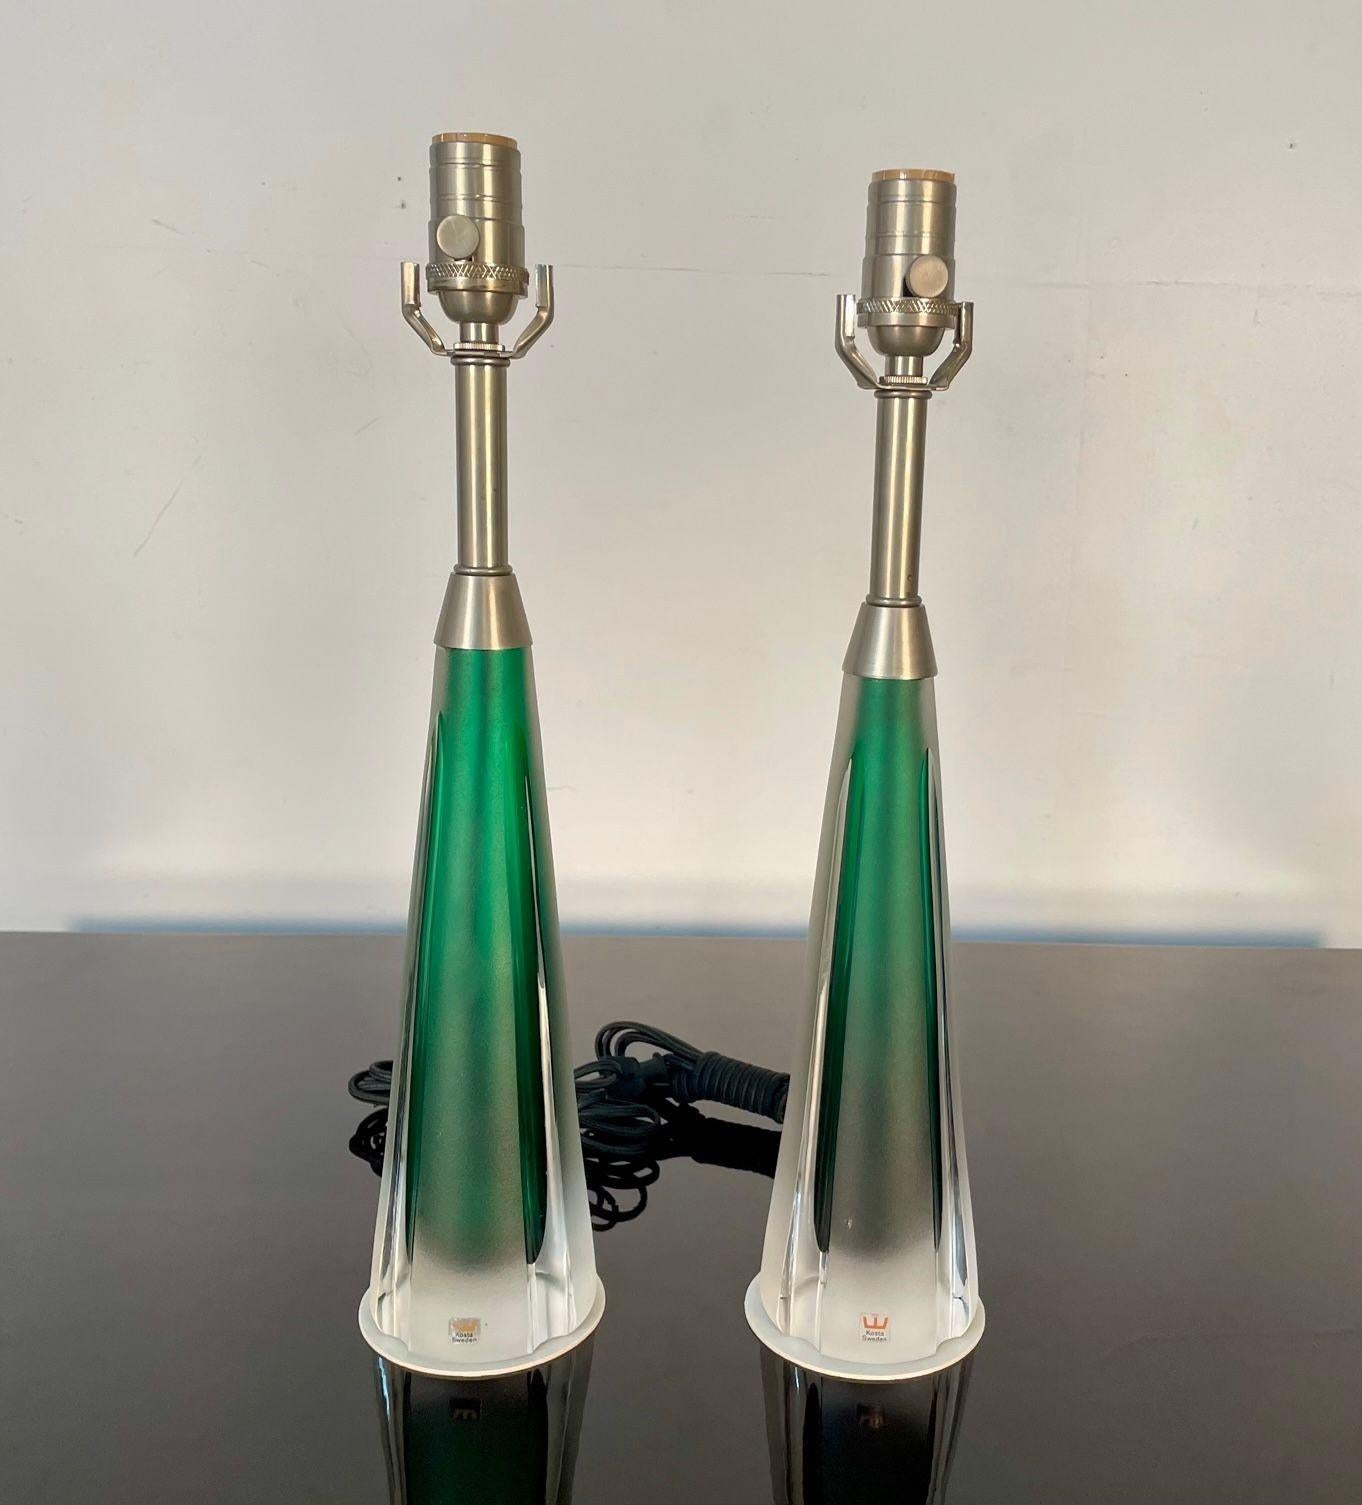 Pair of Swedish Mid-Century Modern Jade Green Kosta Lamps, Perfume Bottle Shape

Pair of perfume shaped smaller table or desk lamps by Vicke Lindstrand for Kosta in a beautiful frosted glass and jade green glass. Maintaining their original KOSTA